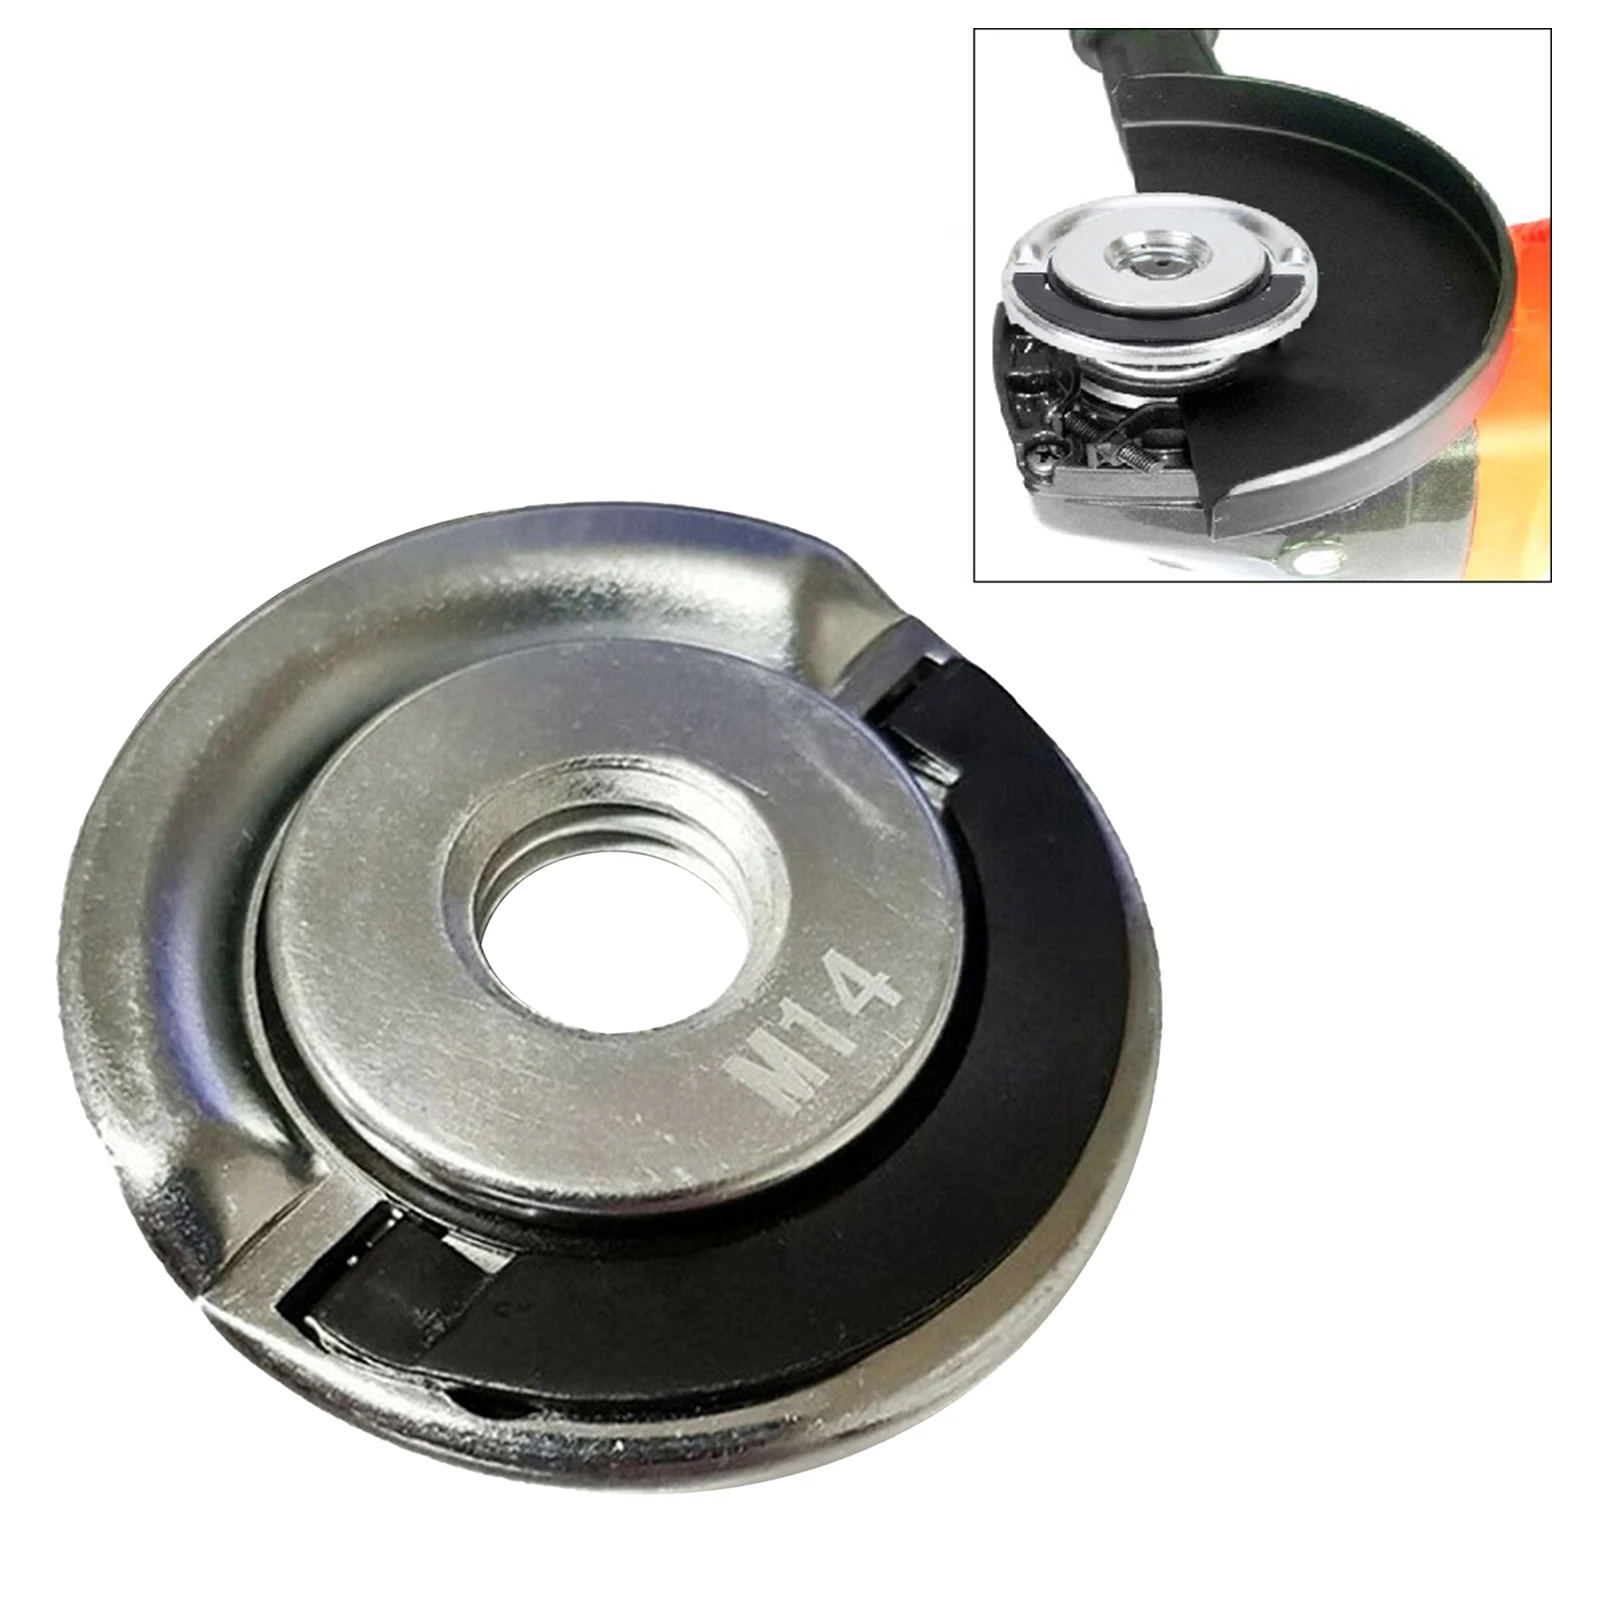 Angle Grinder Flange Lock Nuts M14 Thread Quick Change, Easy to Use and Easy to Install,Labor Saving